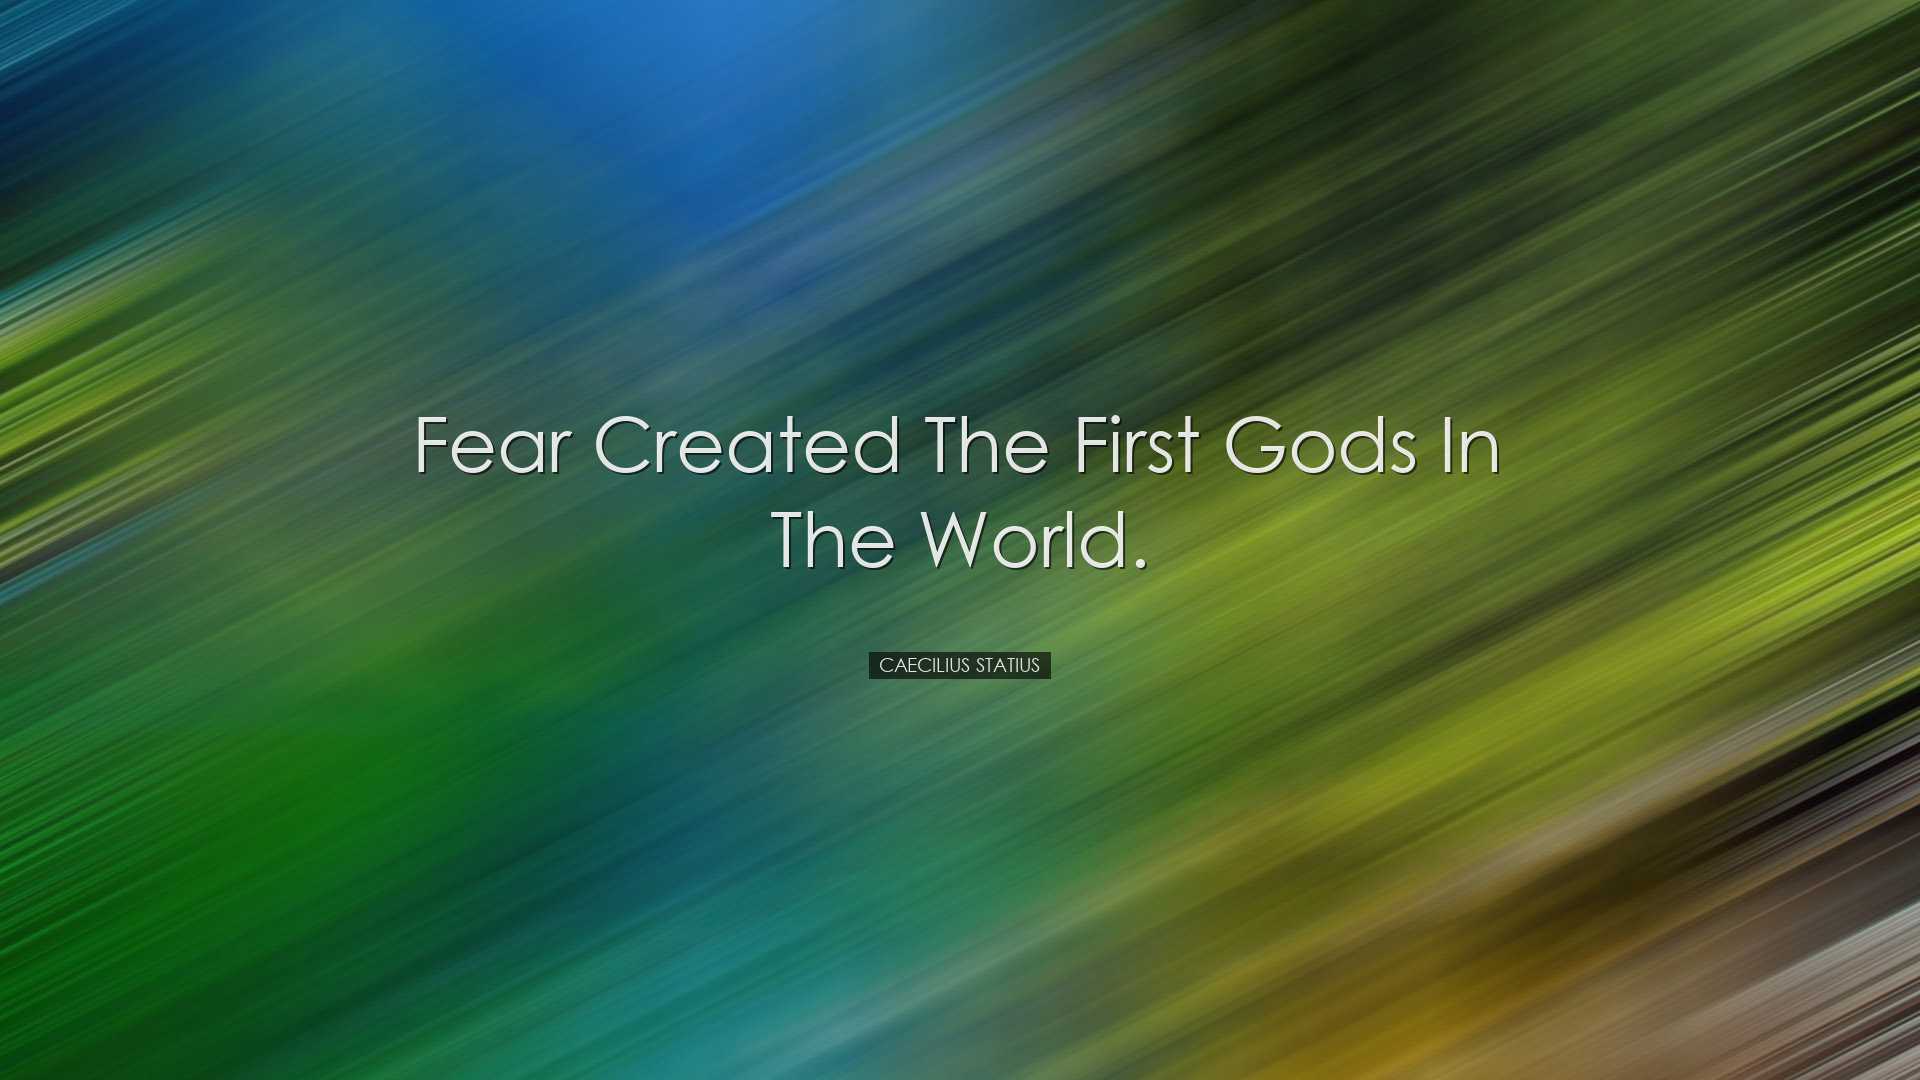 Fear created the first gods in the world. - Caecilius Statius